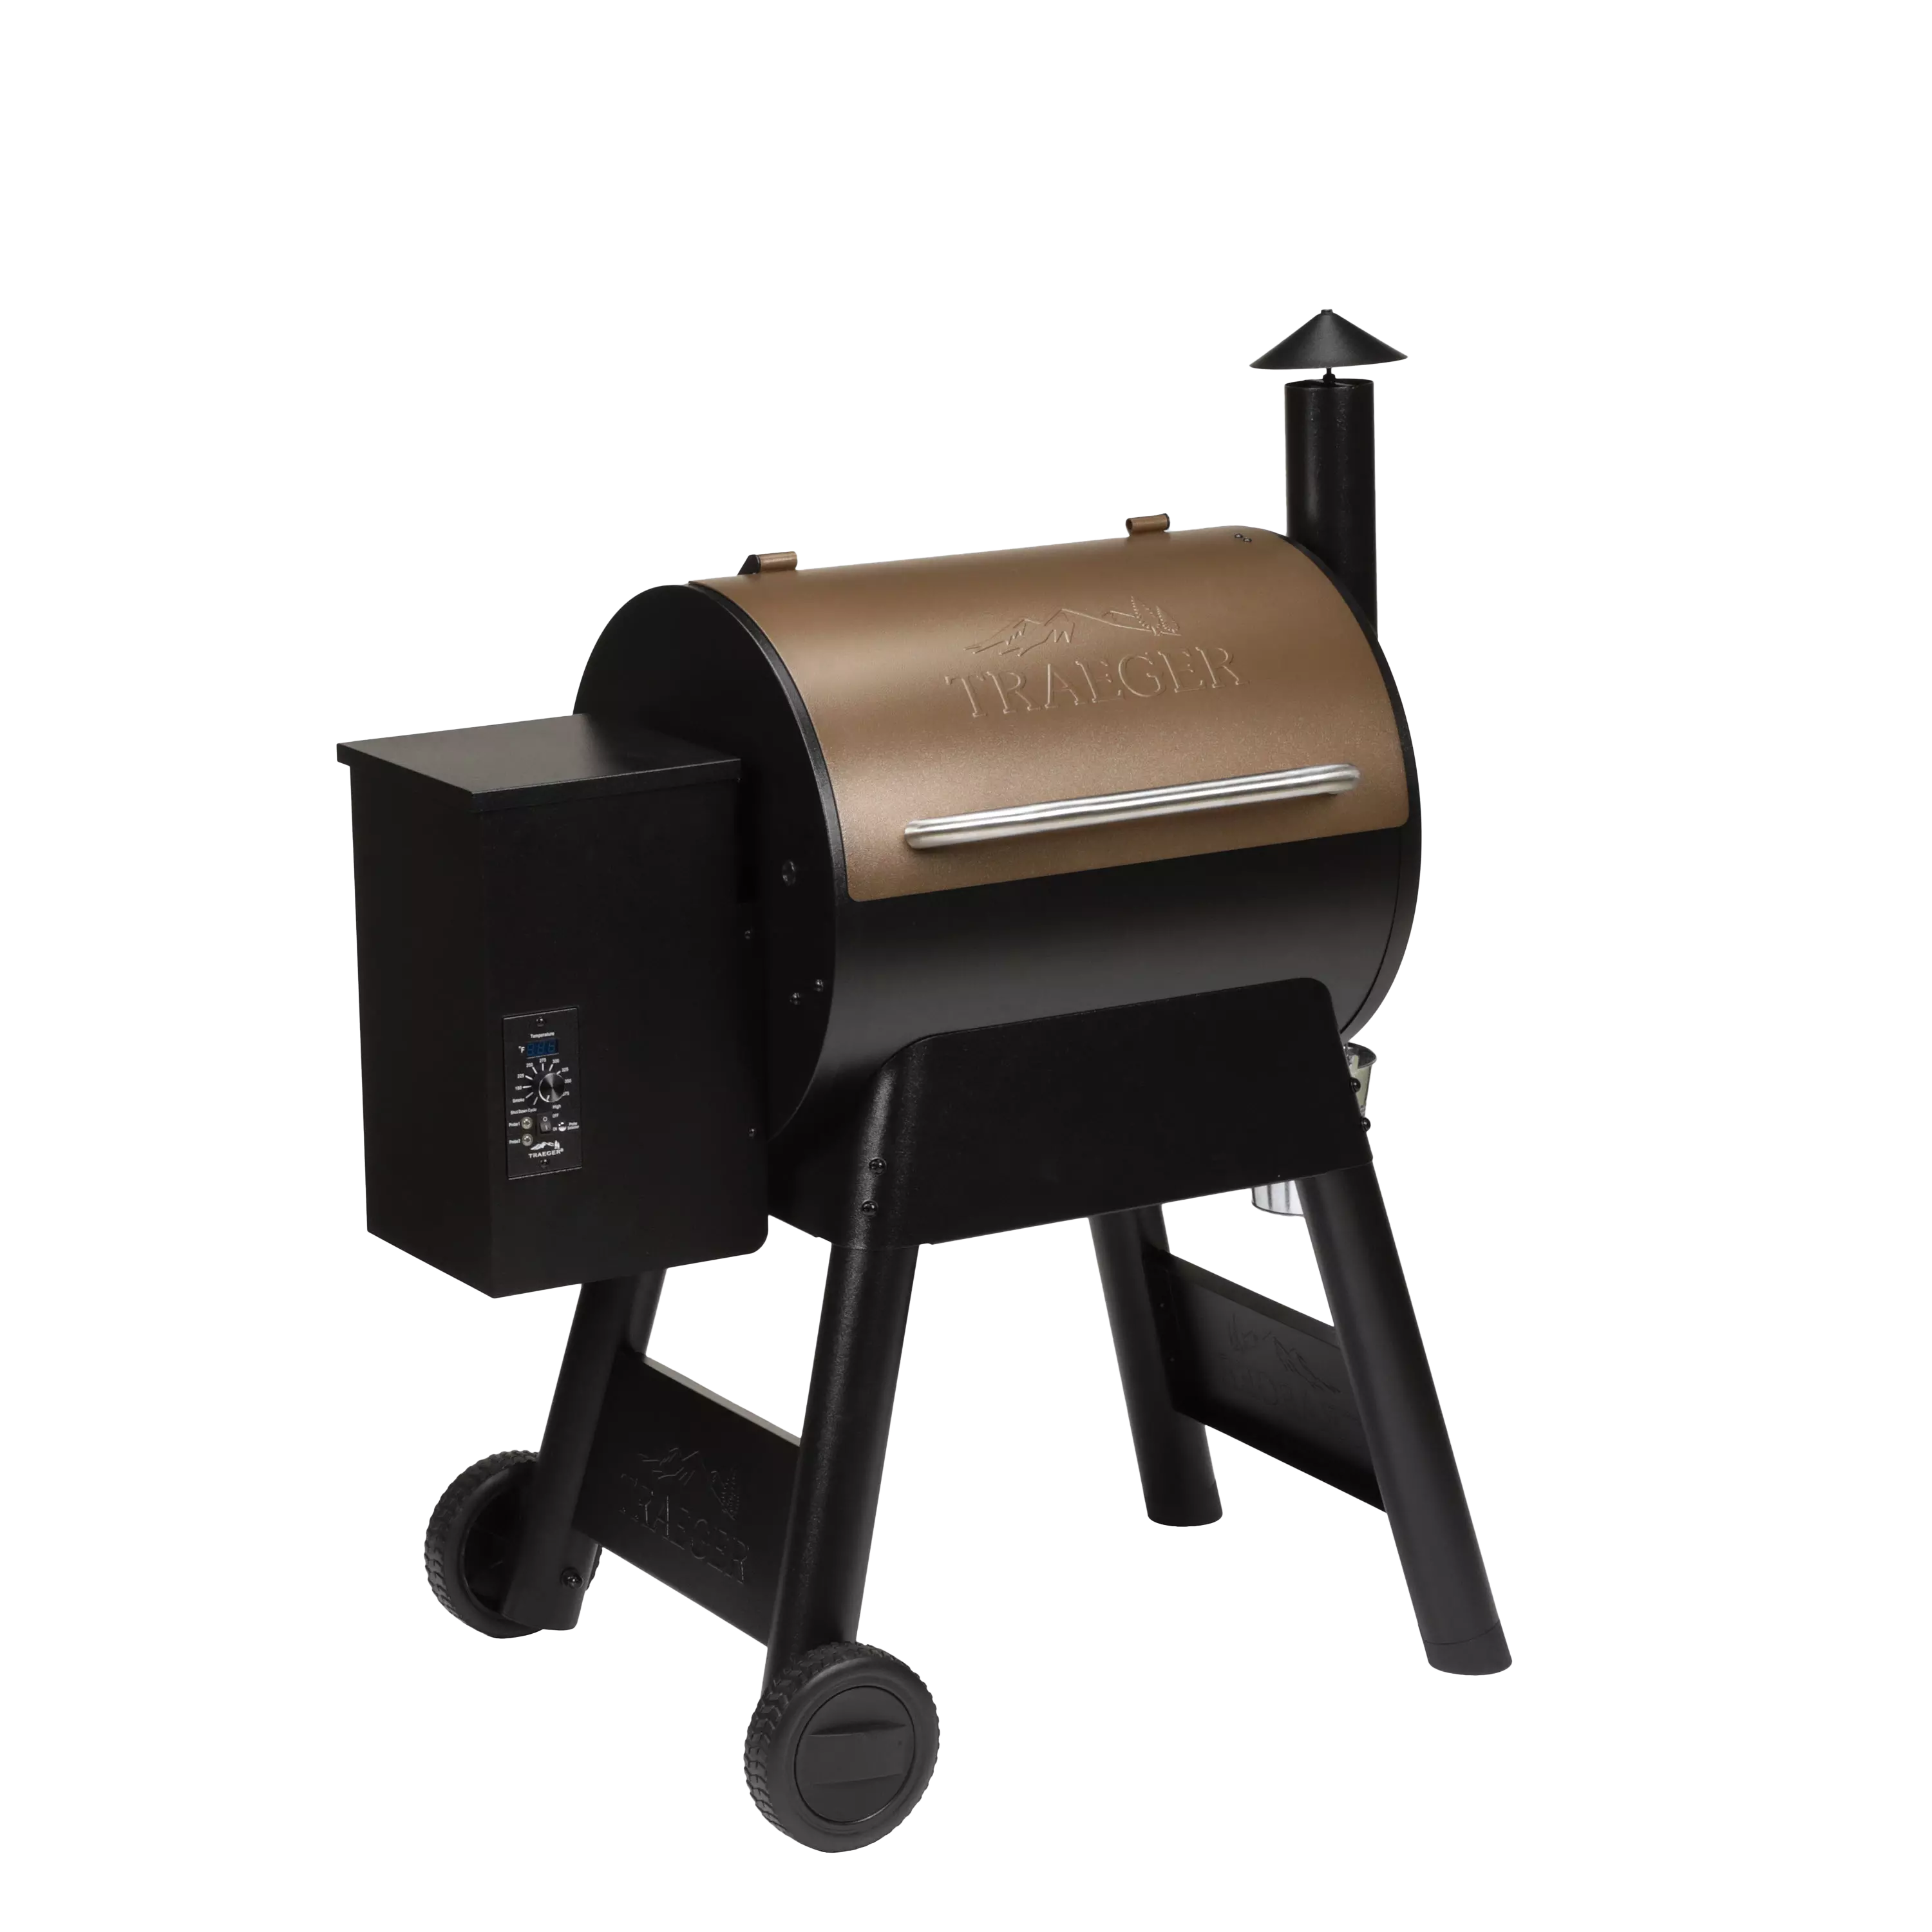 Traeger Grills Pro Series 22 Electric Wood Pellet Grill and Smoker, Bronze,  Extra large